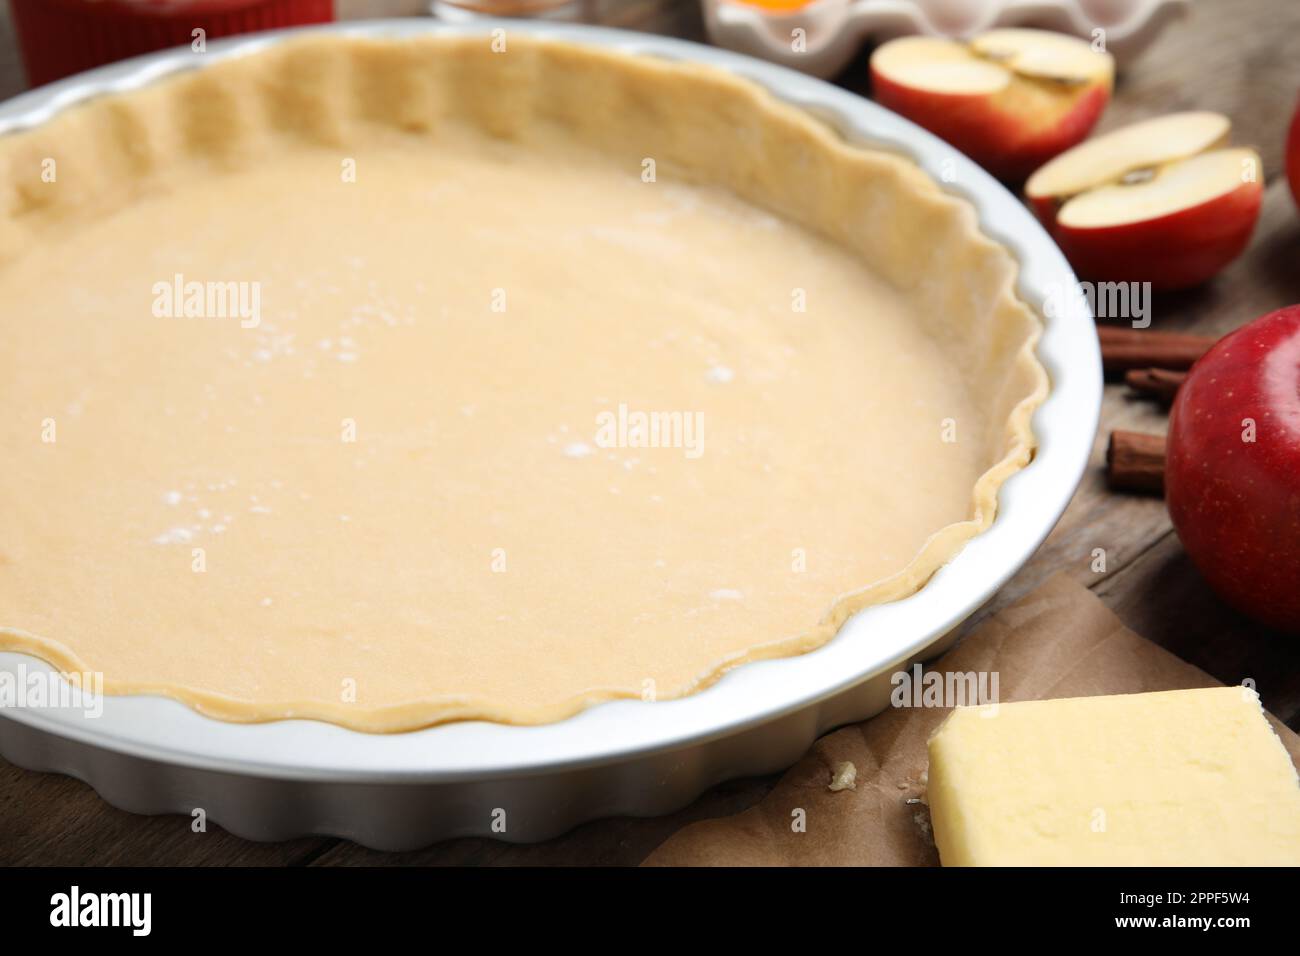 Raw dough for traditional English apple pie on wooden table, closeup Stock Photo